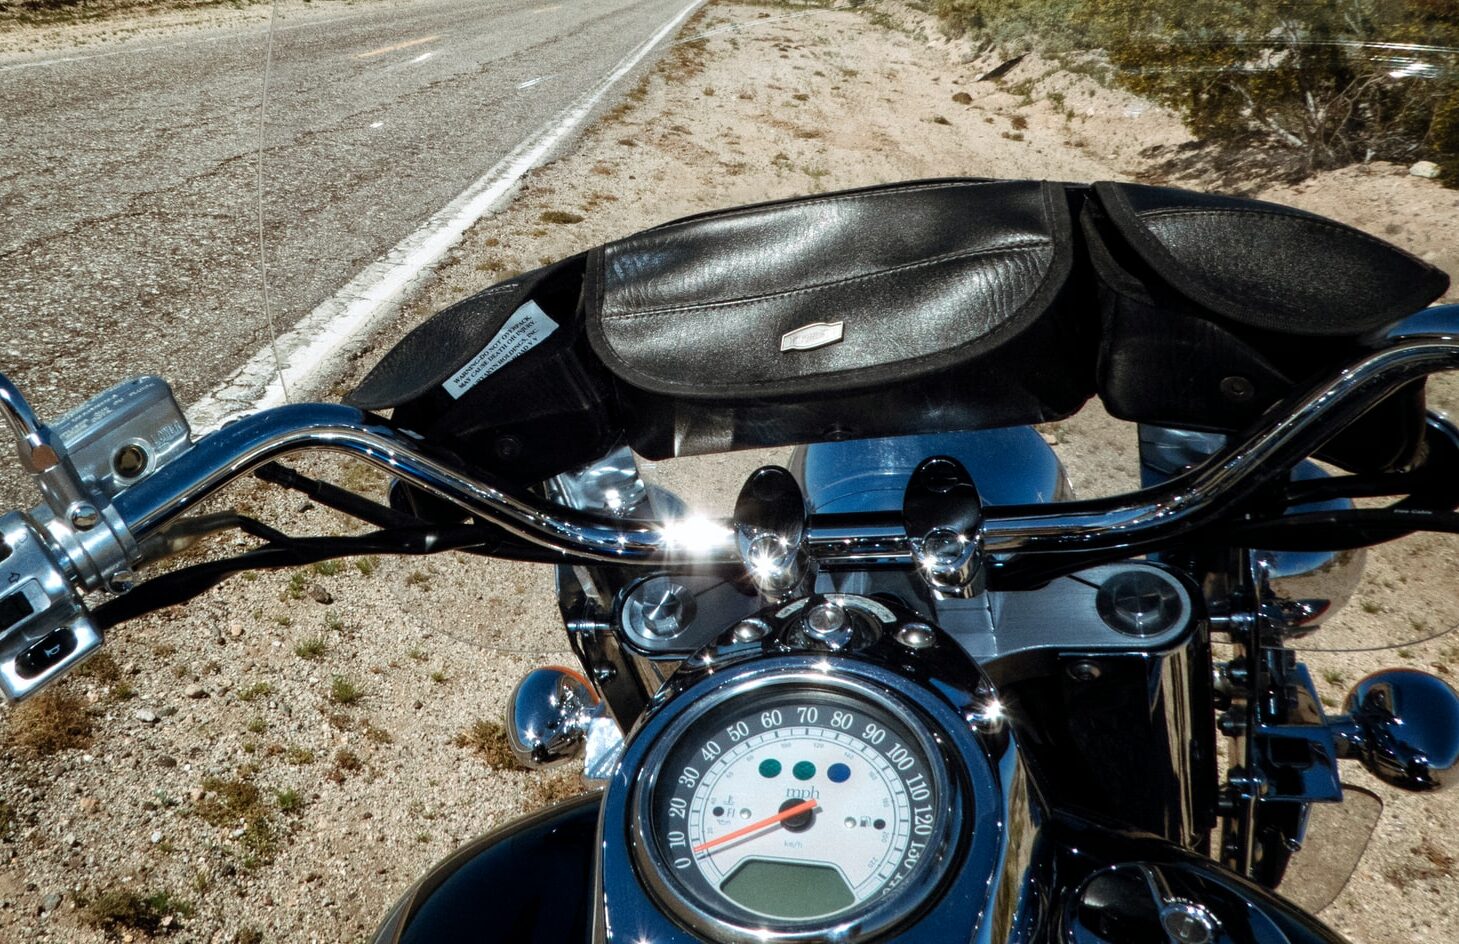 Do I Need to Contact the Police After a Motorcycle Accident in California?